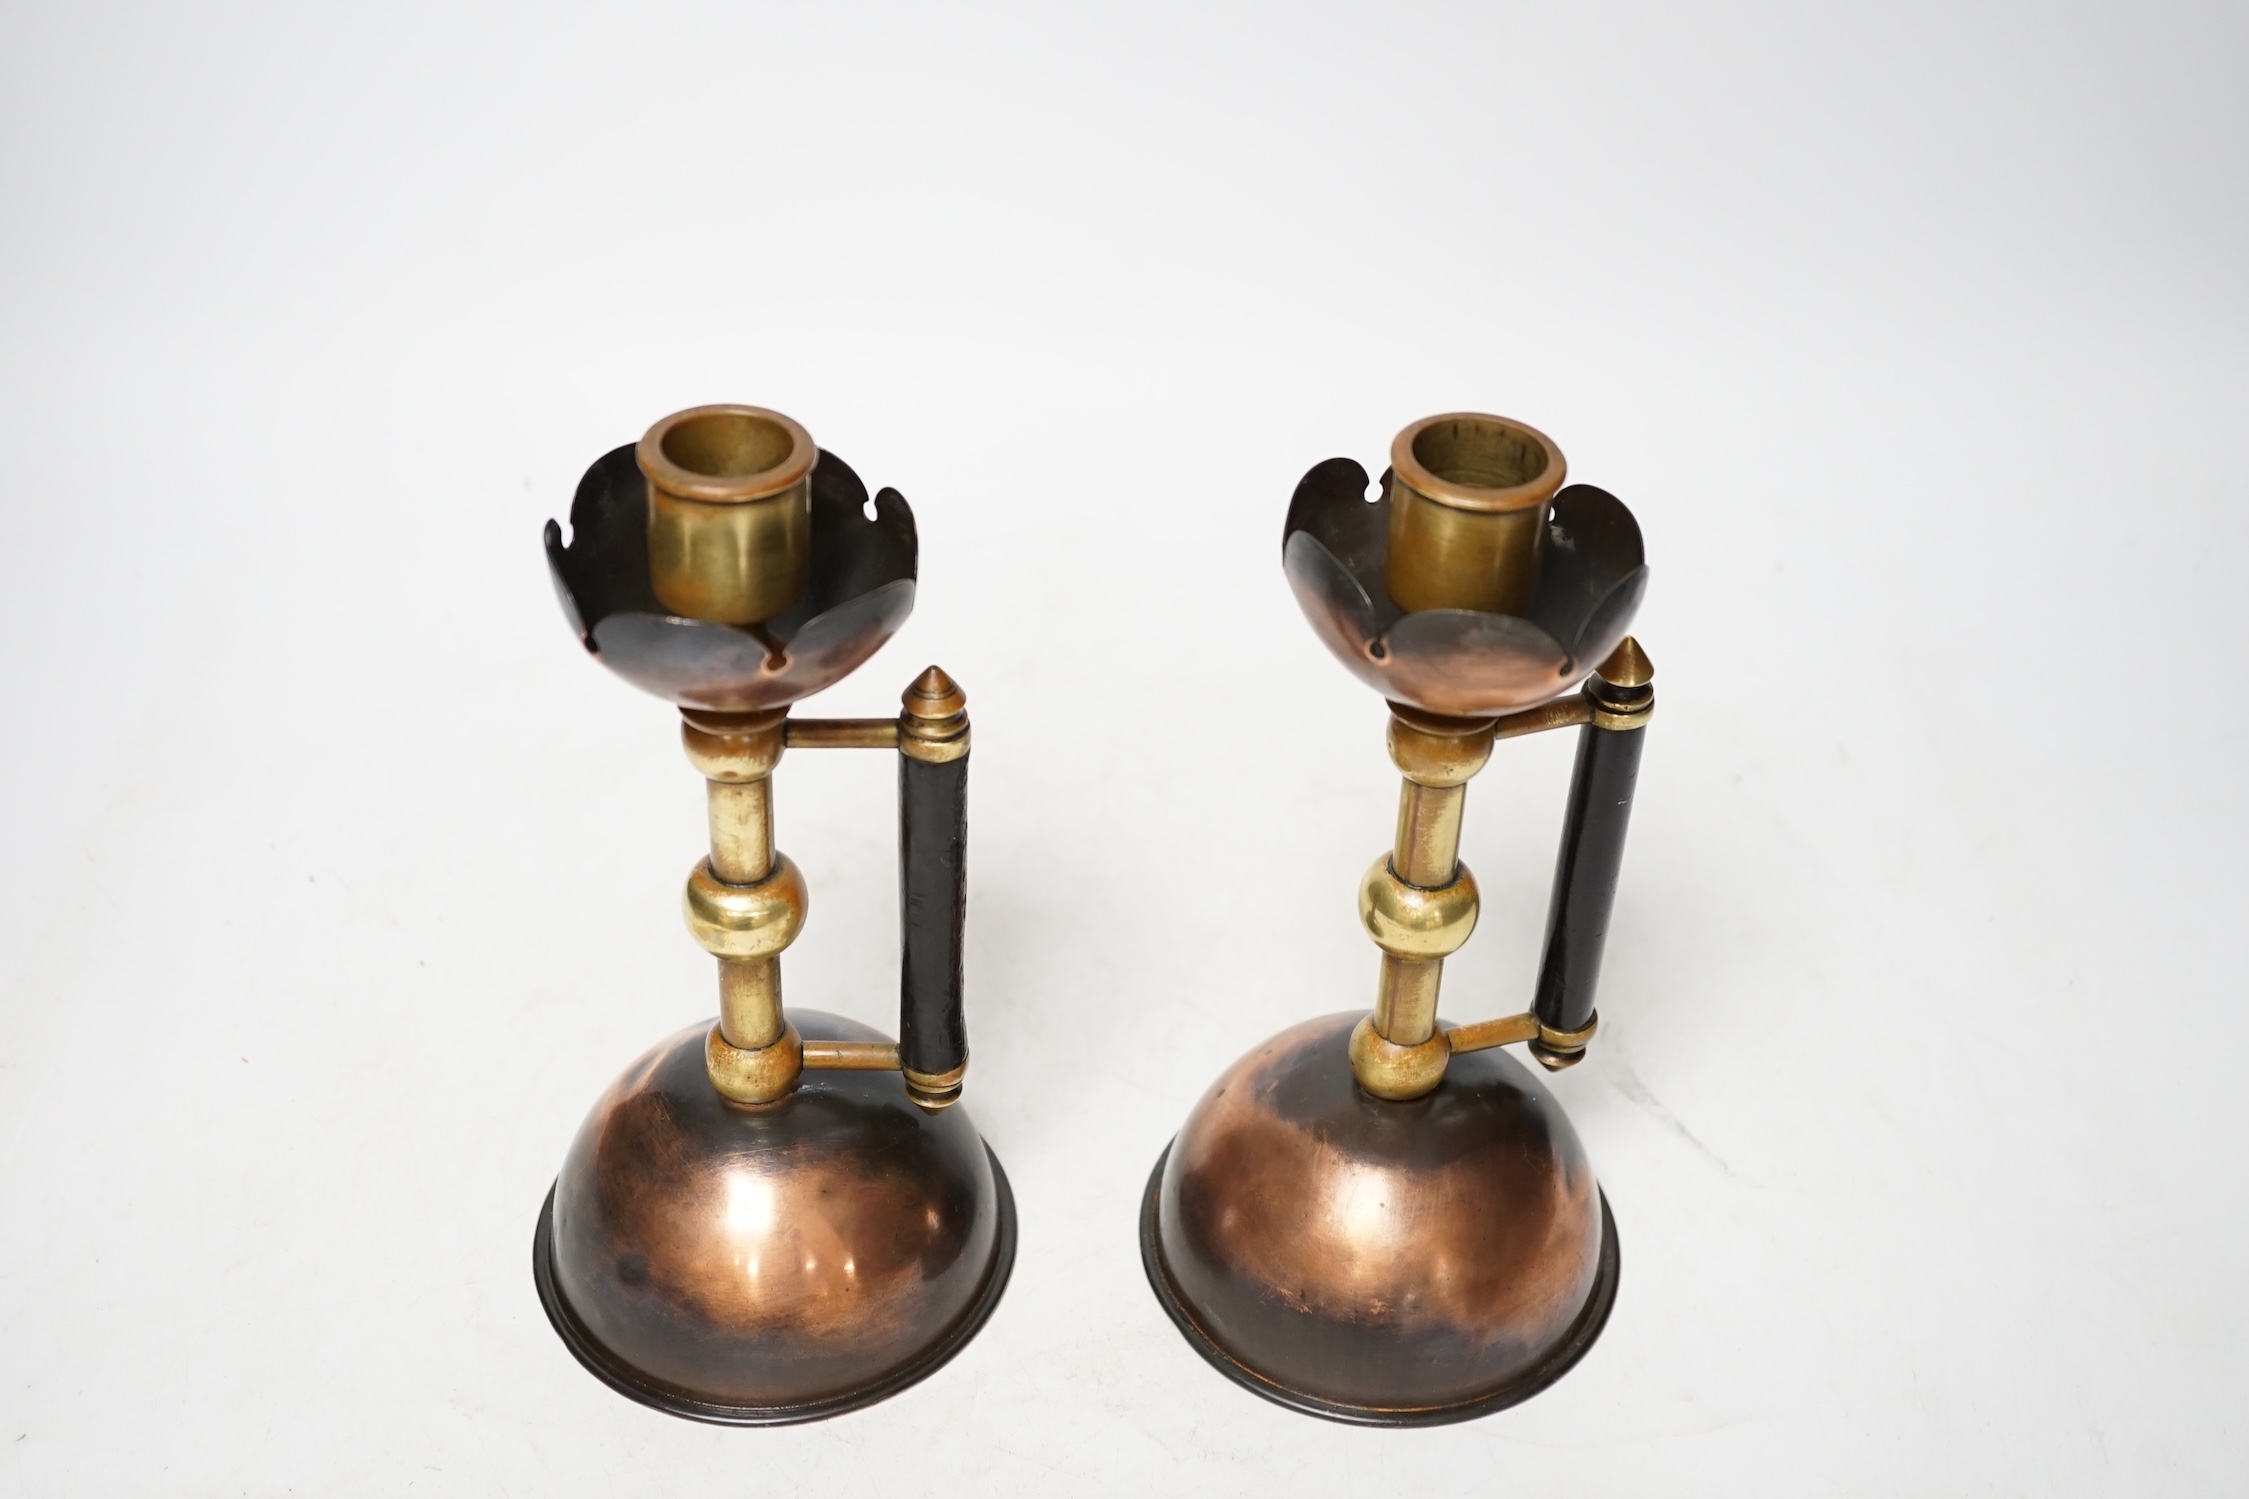 Christopher Dresser, a pair of copper and brass candlesticks by Benham and Froud, 18.5cm. Condition - fair